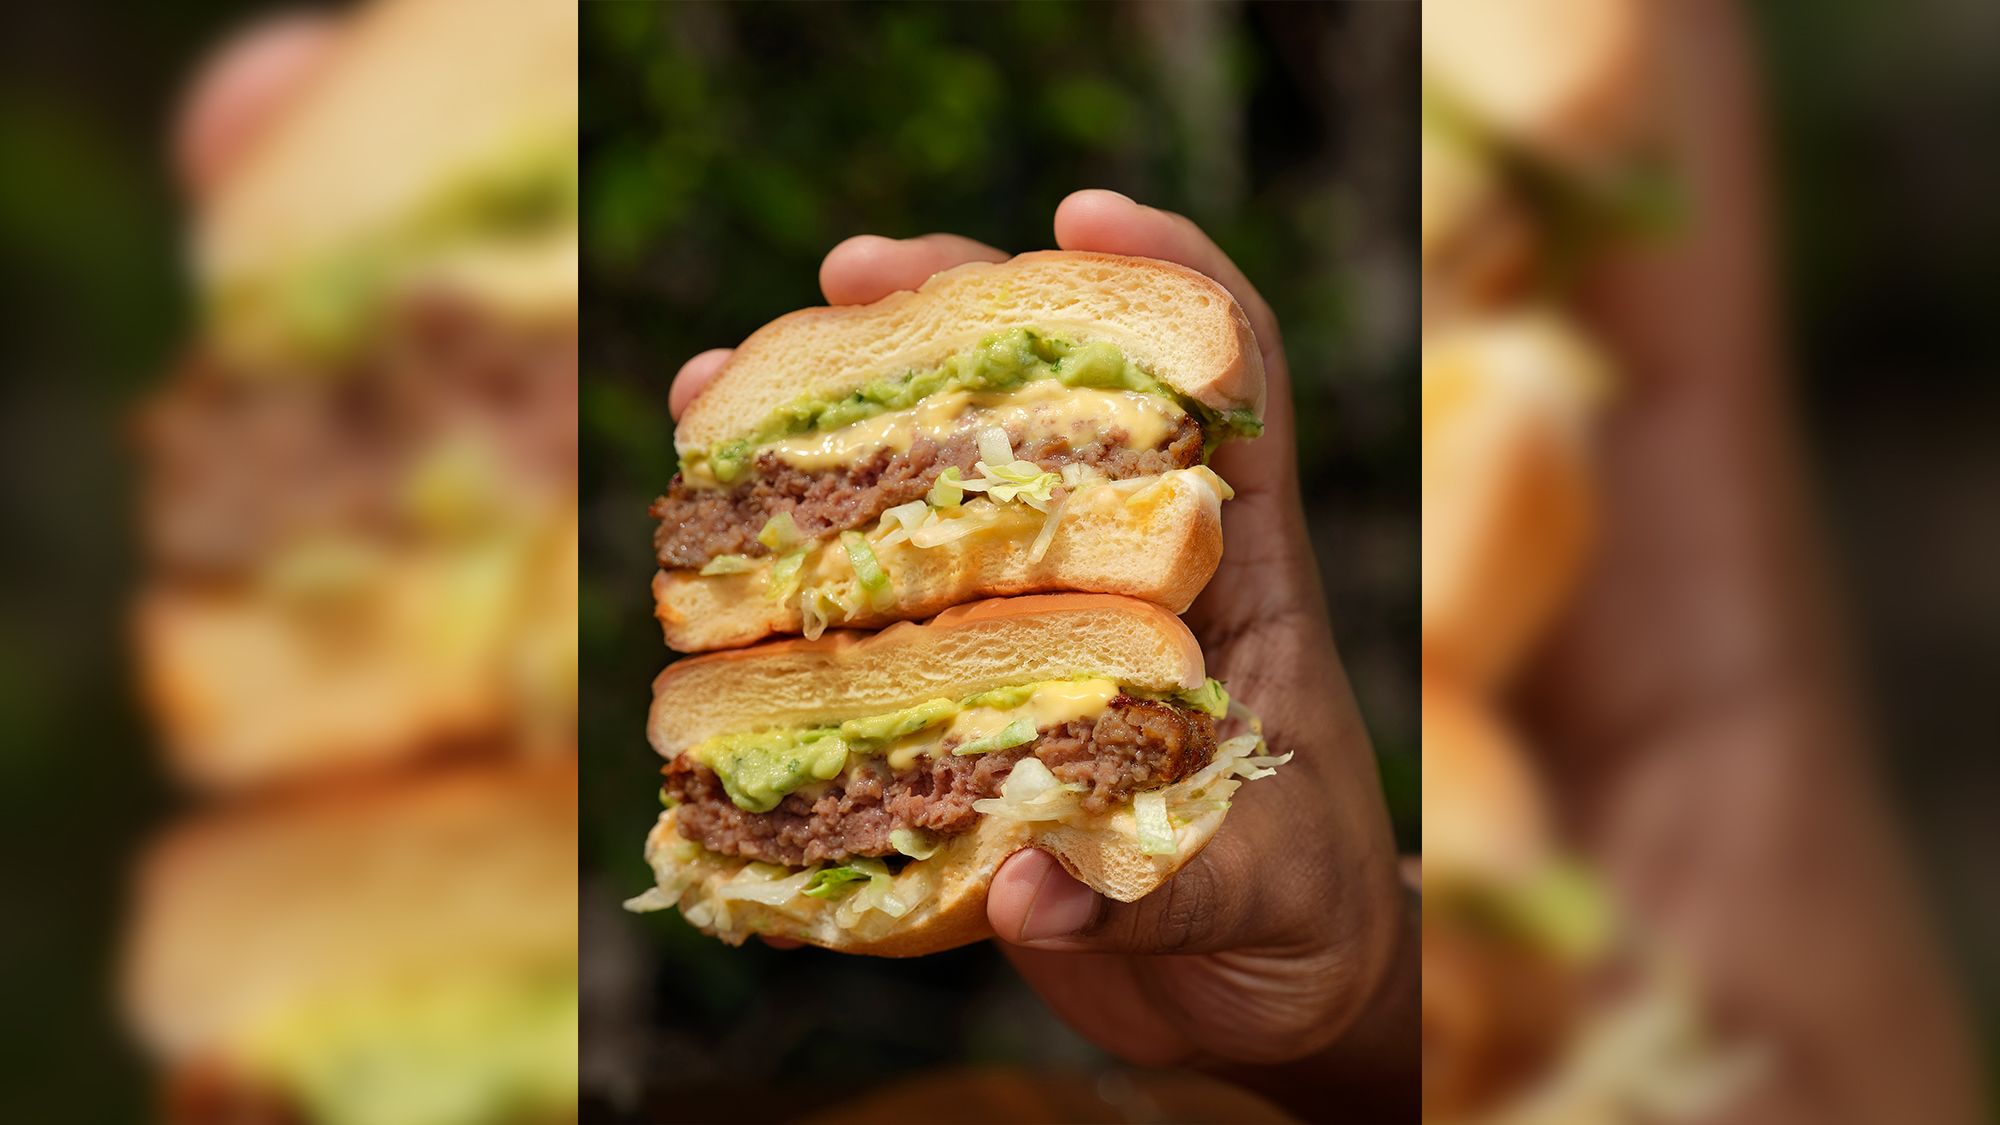 Beyond Meat is launching a new meatless burger